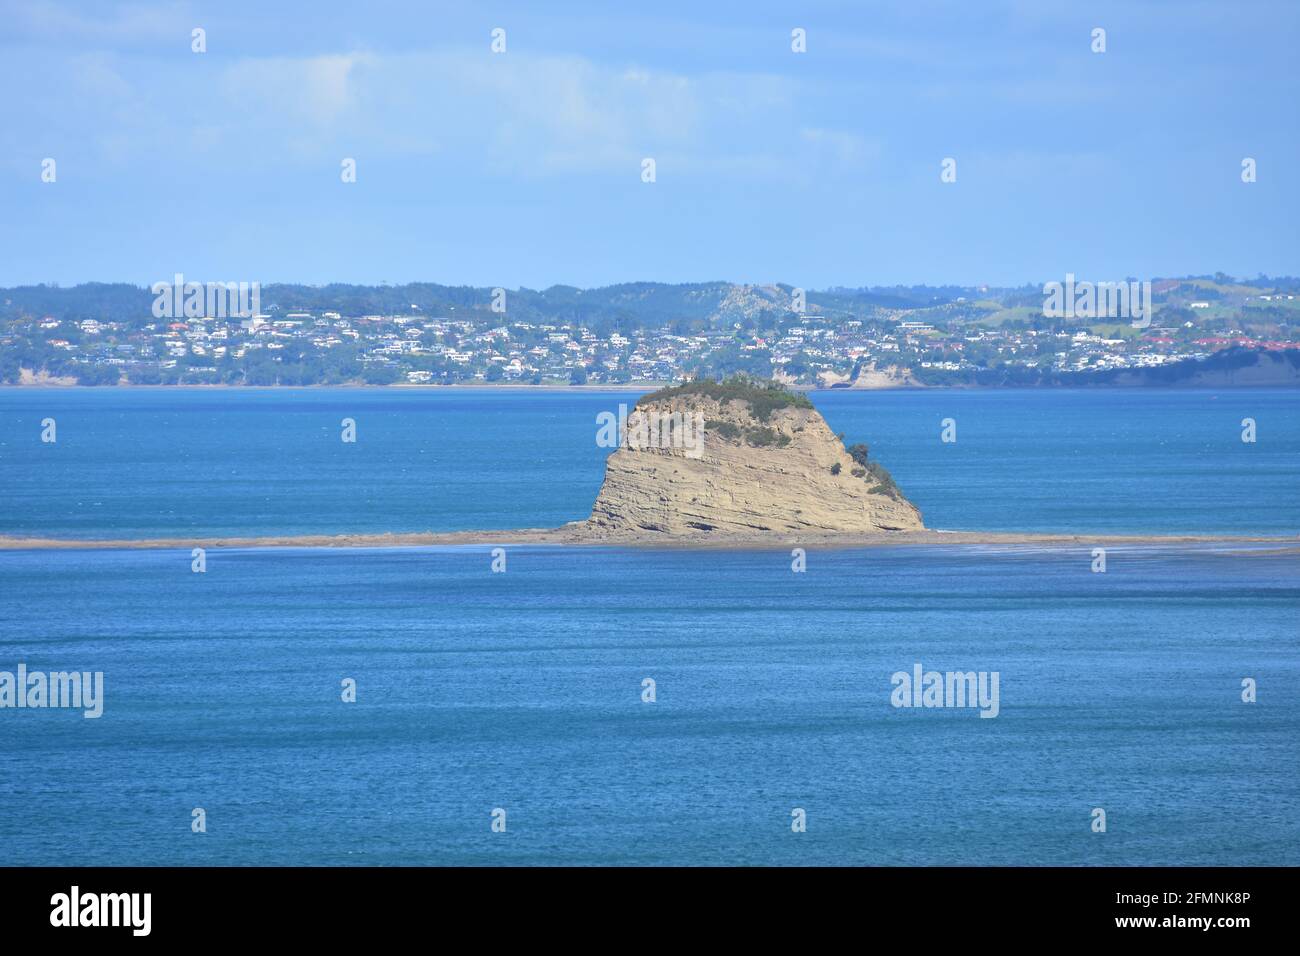 Tiny rocky islet with some grass coverage on top of rocky reef protruding from blue sea at low tide. Stock Photo